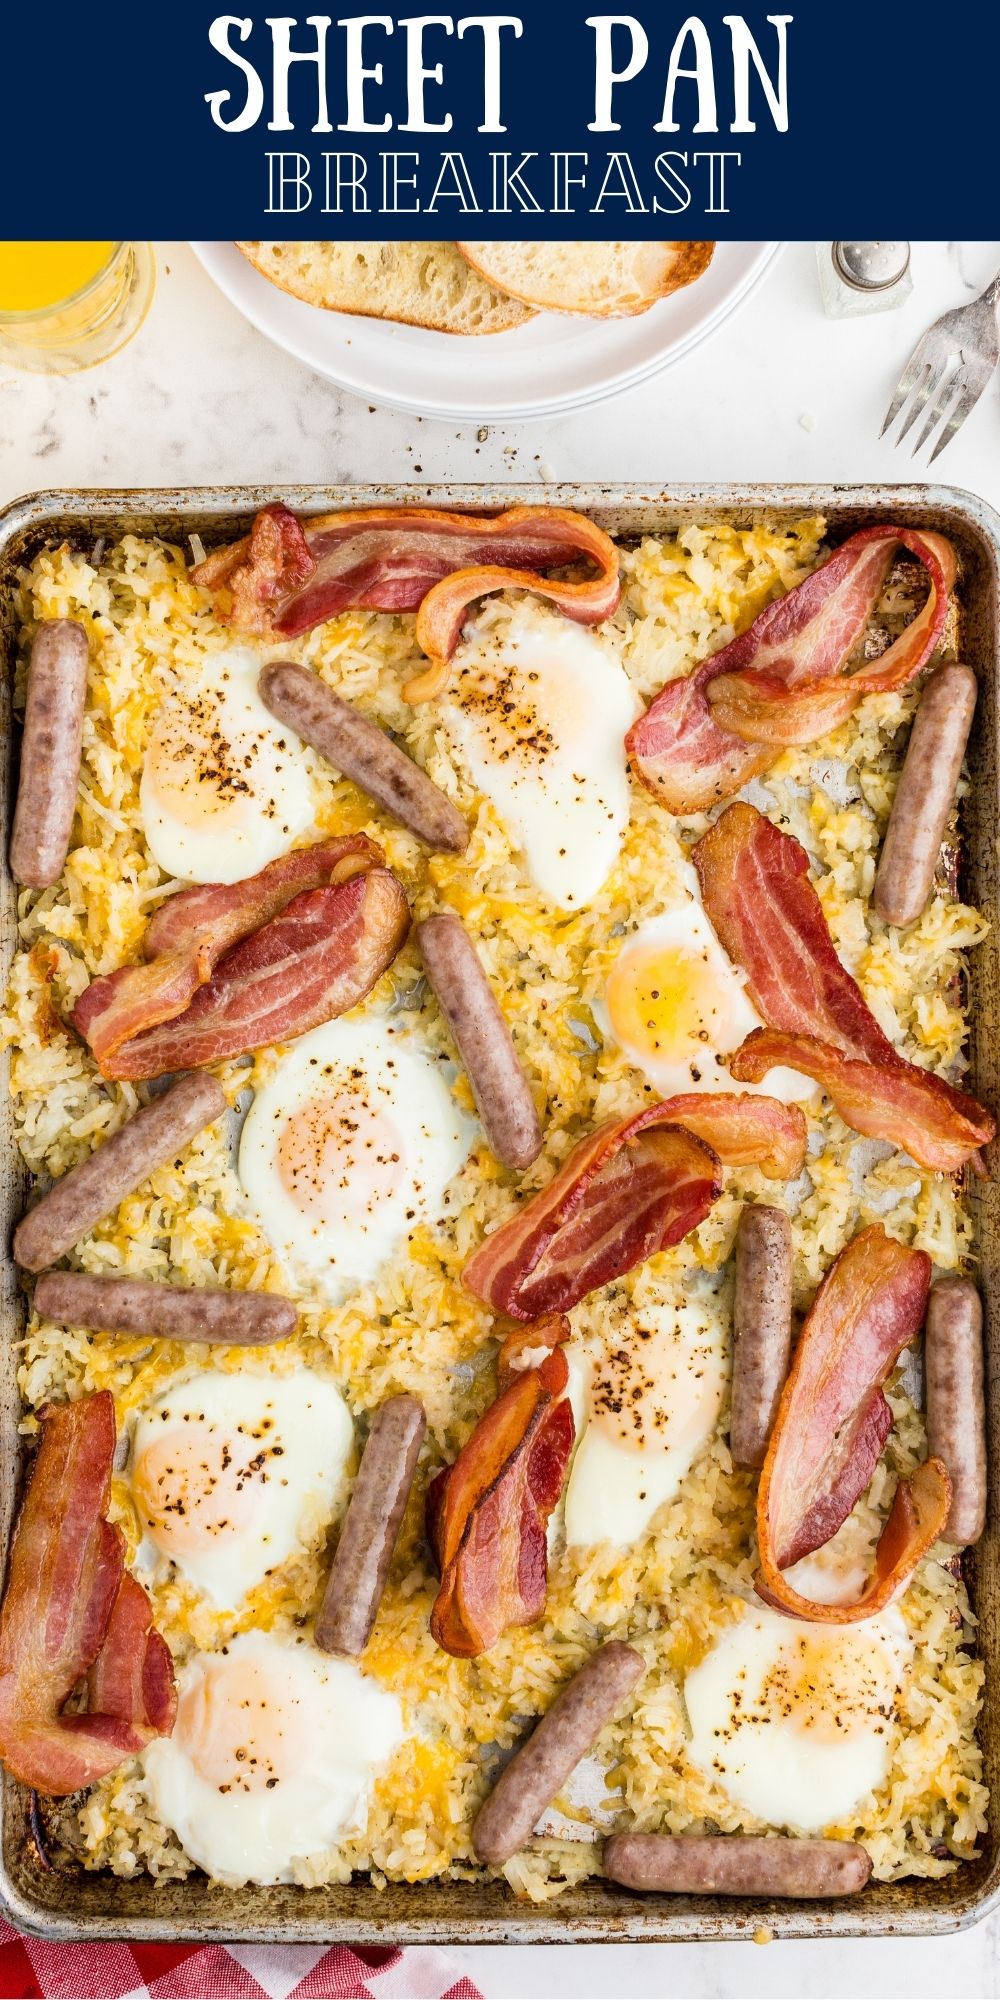 My Sheet Pan Breakfast is a fun one-pan breakfast meal with eggs, cheesy hash browns, sausage and bacon. The perfect weekend breakfast! via @familyfresh